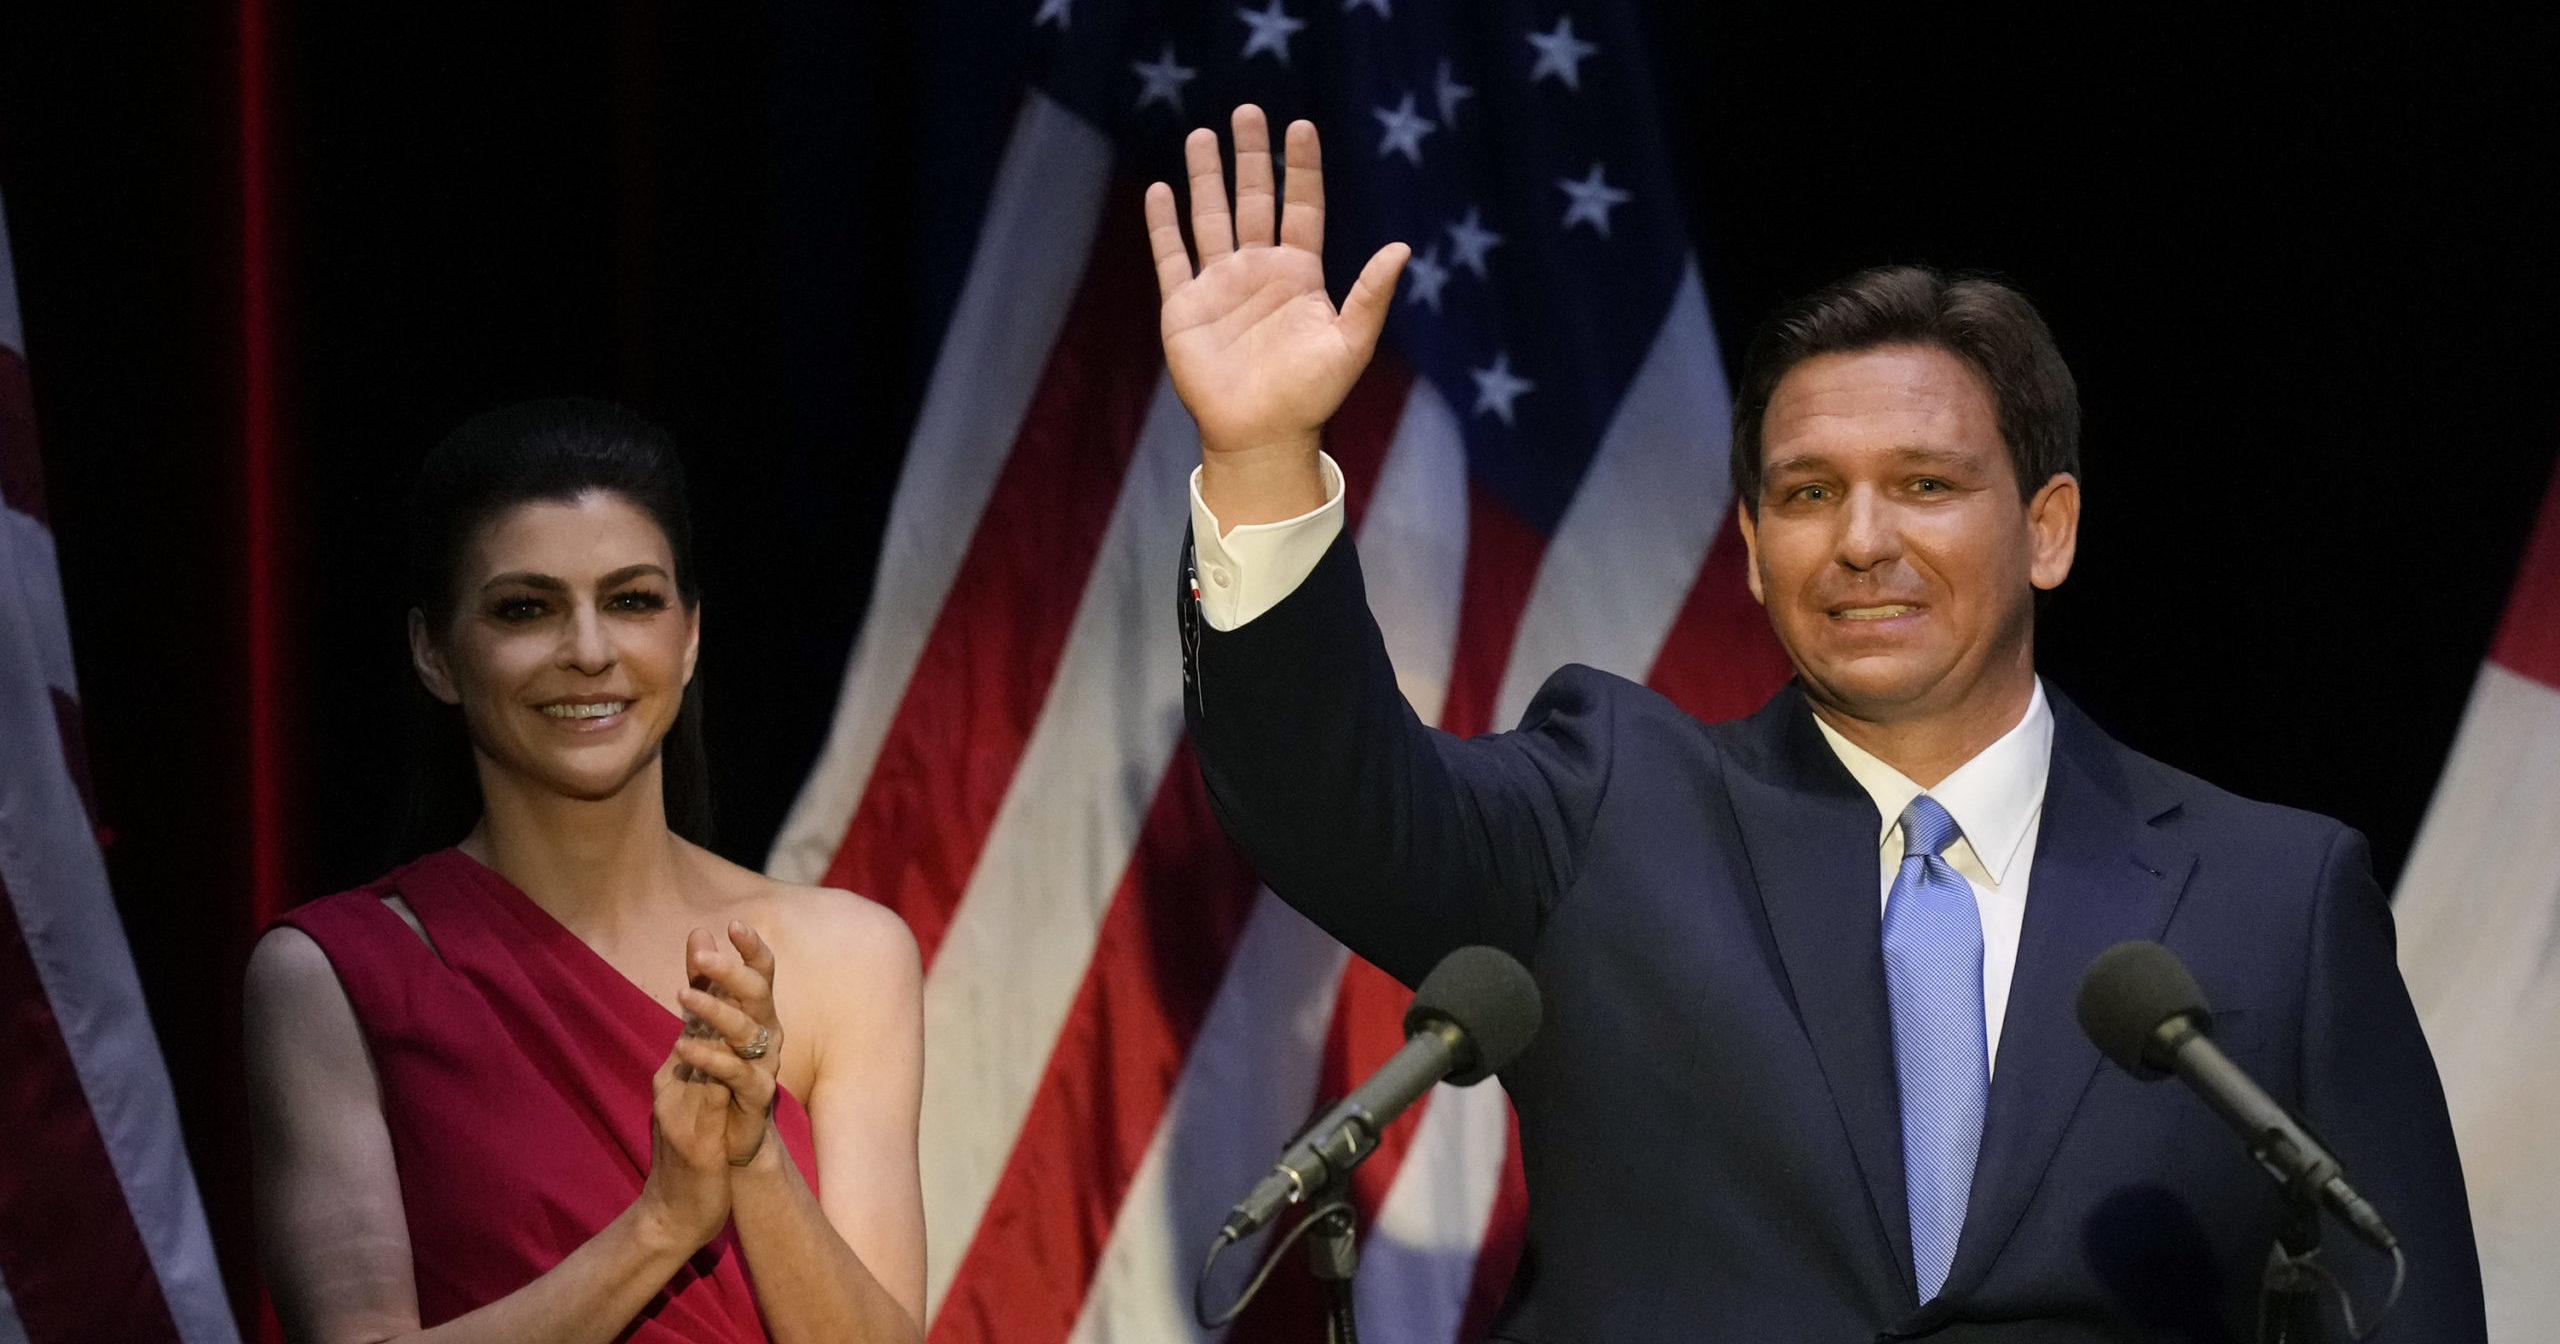 Florida's Republican Gov. Ron DeSantis waves as his wife Casey applauds following a televised debate against Democratic opponent Charlie Crist in Fort Pierce, Florida, on Oct. 24.